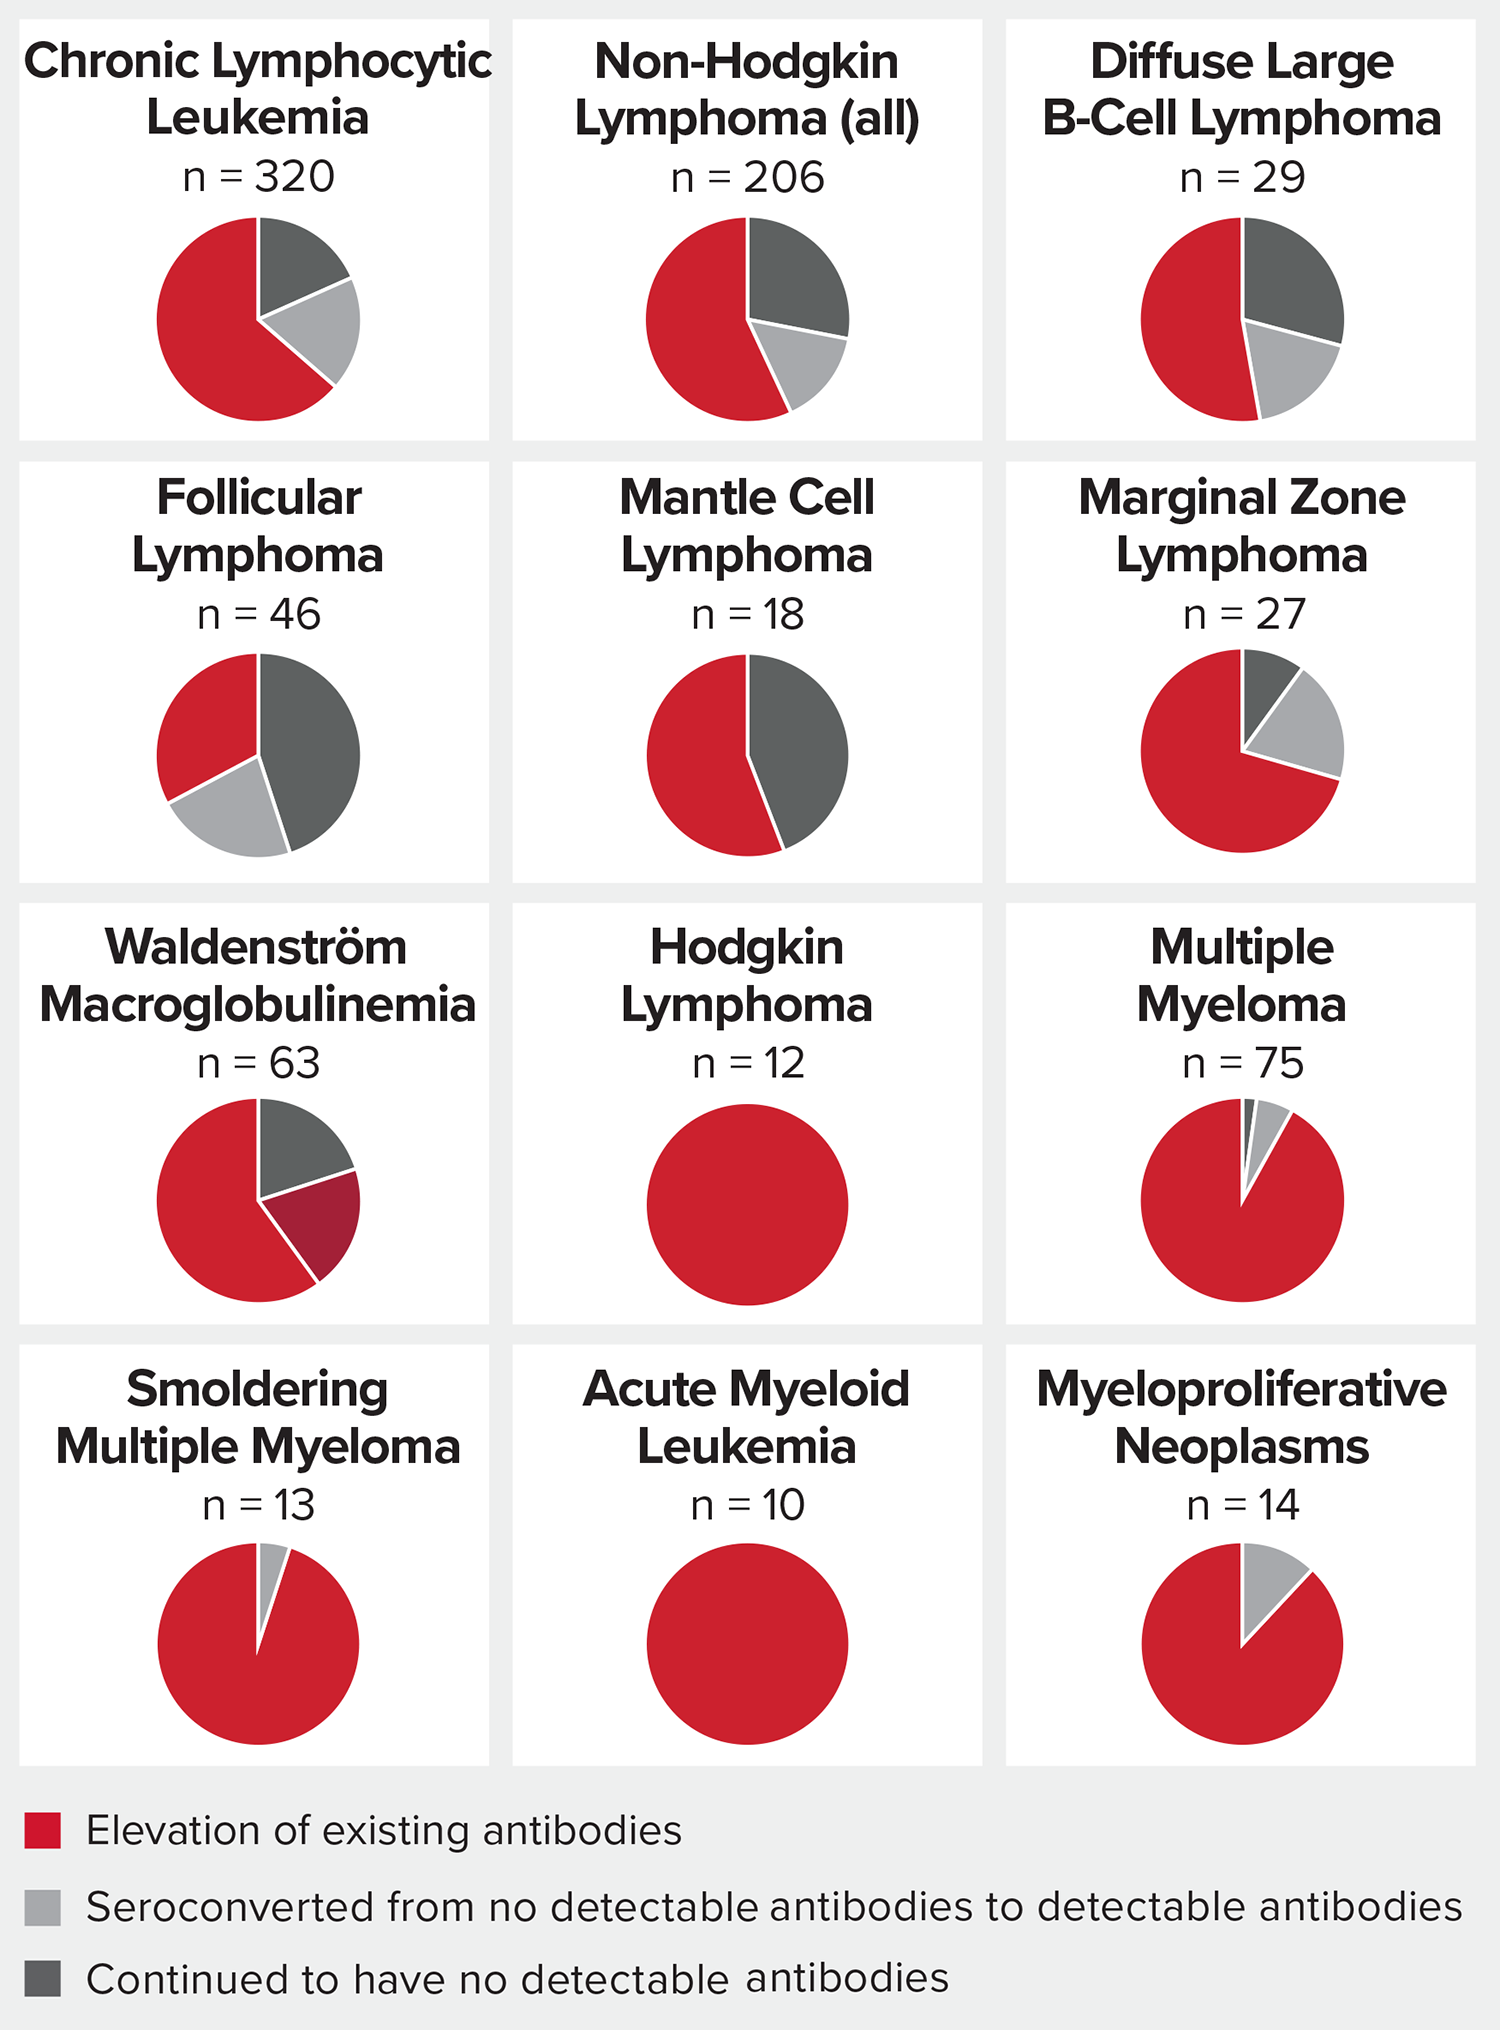 Figure 1. The benefit of COVID-19 vaccines varied by blood cancer type